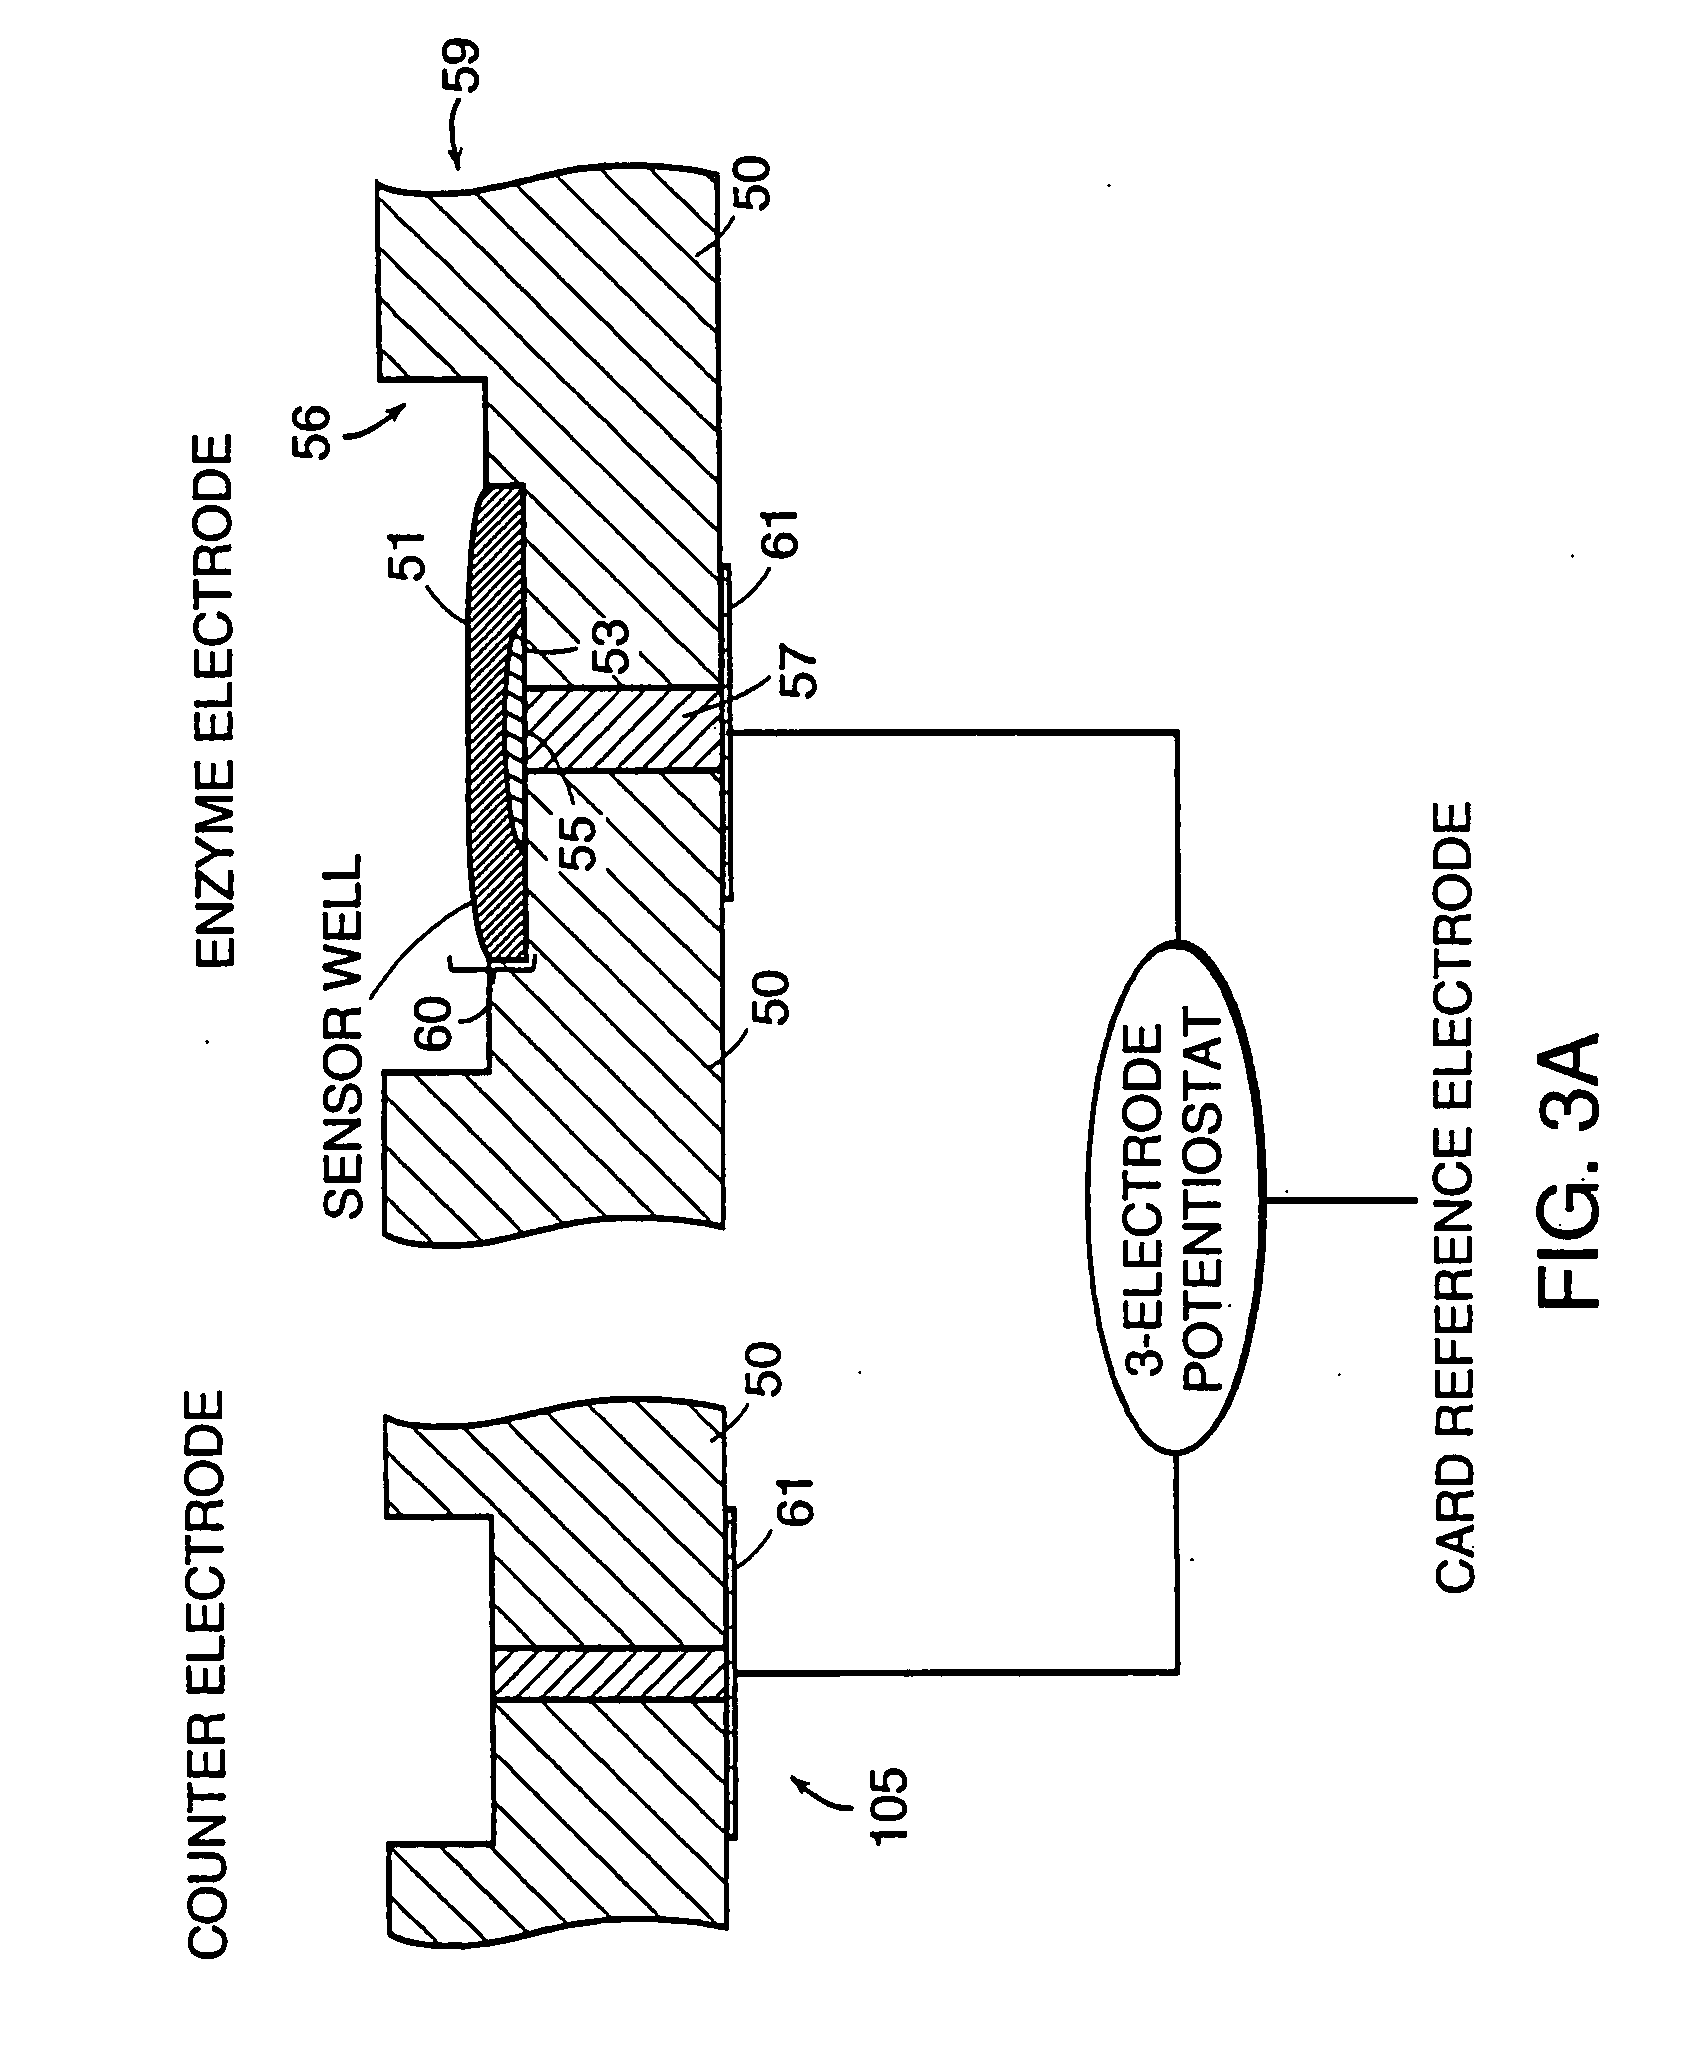 Cross-linked enzyme matrix and uses thereof